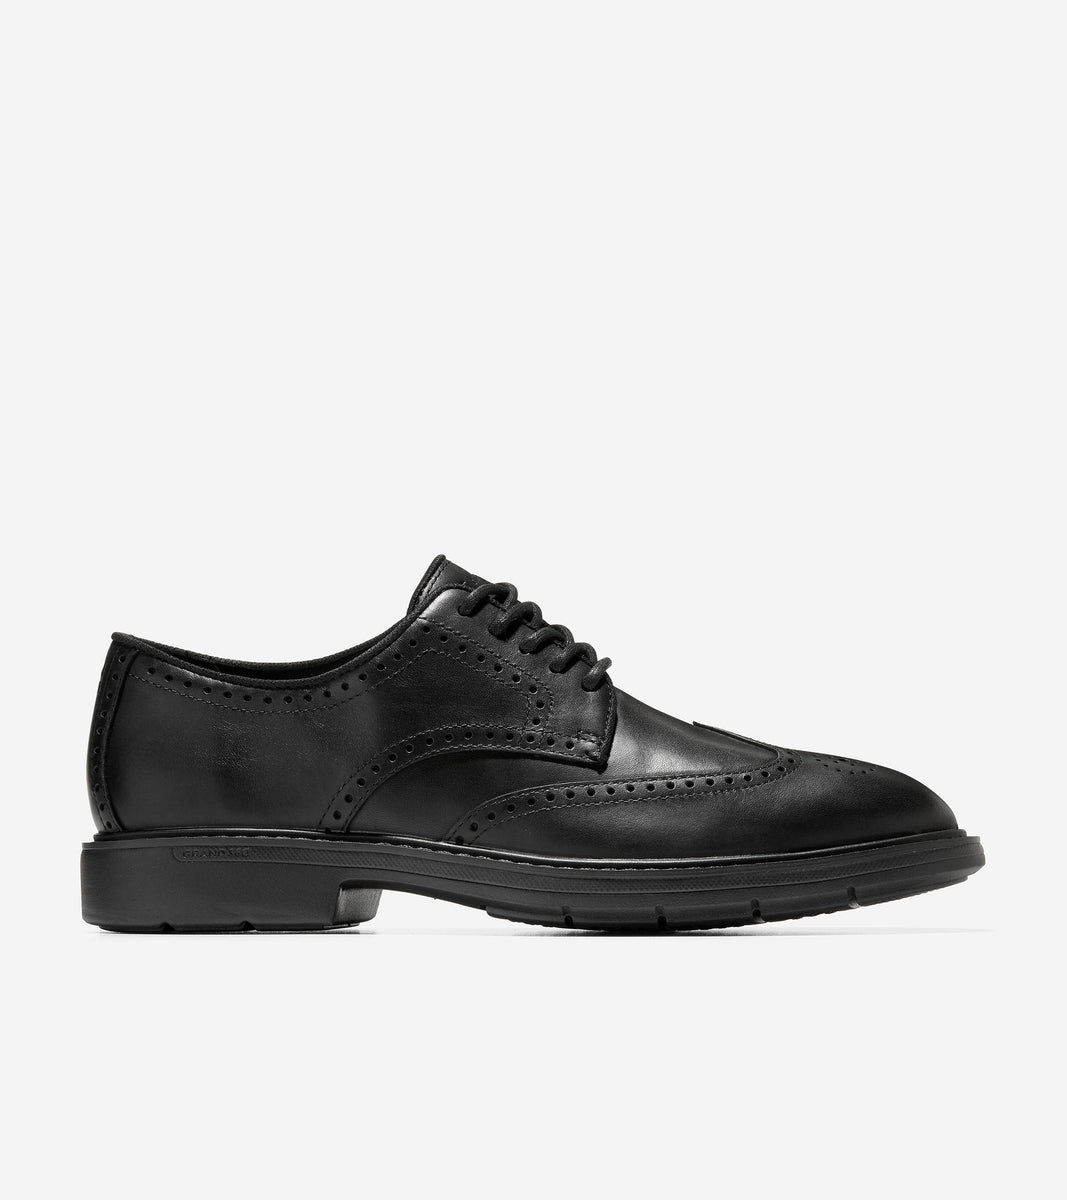 The Go-To Wingtip Oxford